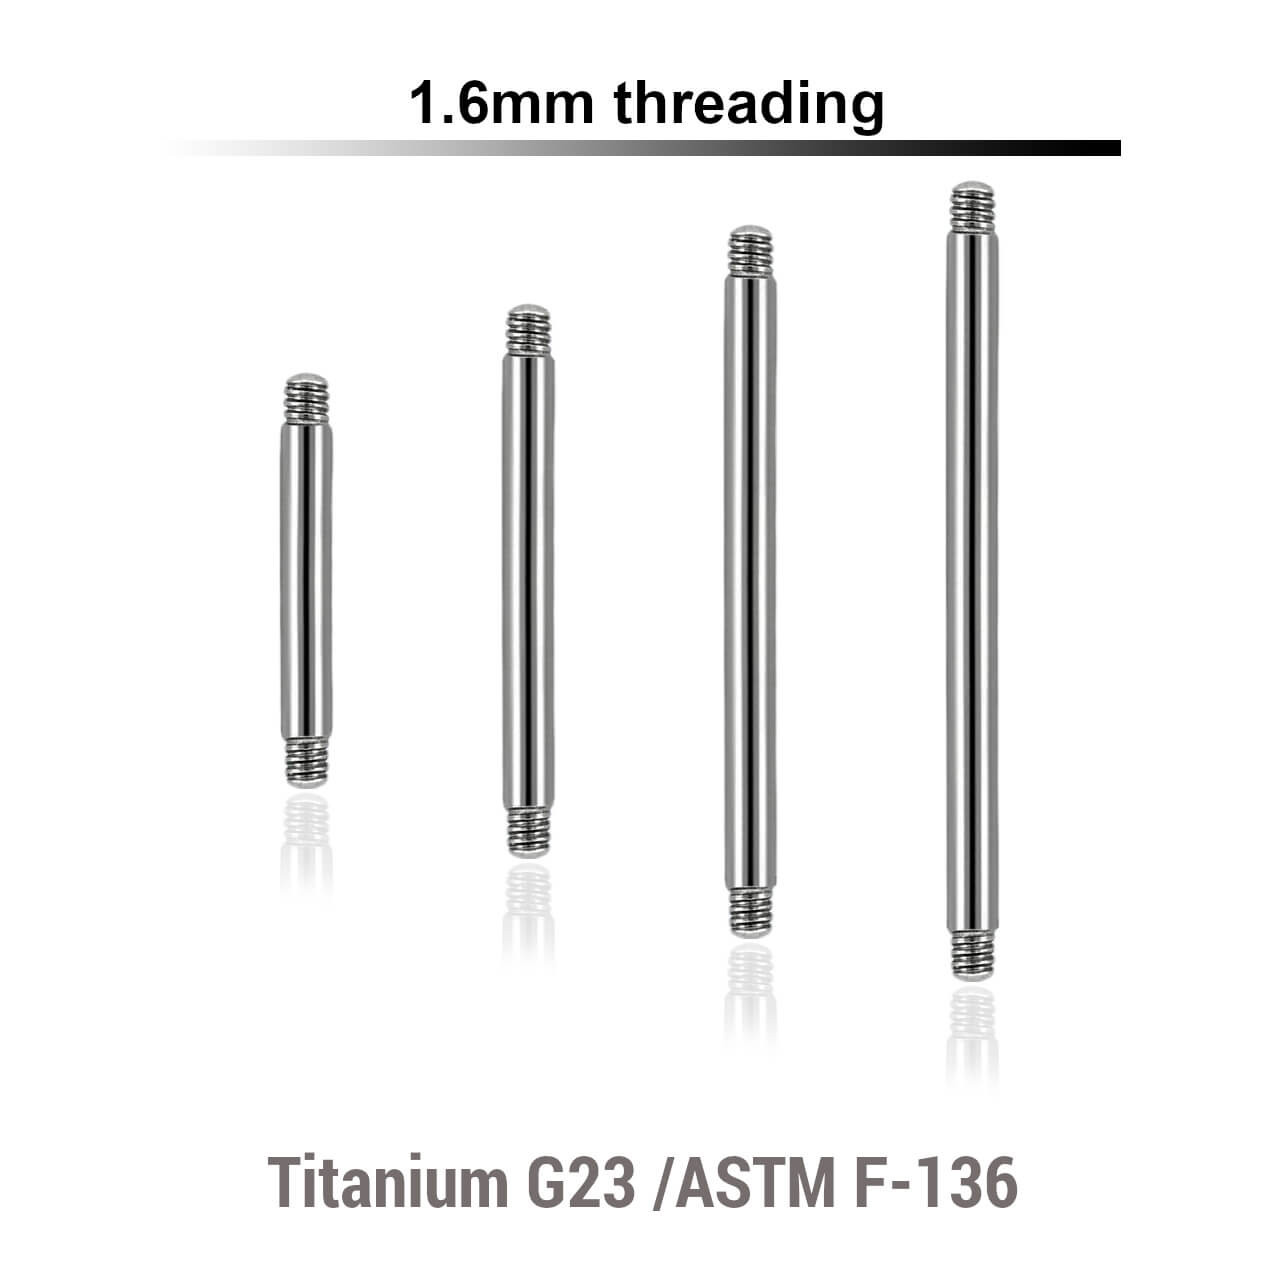 TYBA16N Piercing studio supplies: Pack of 25 pcs. of straight barbell posts in high polished titanium G23, thickness 1.6mm